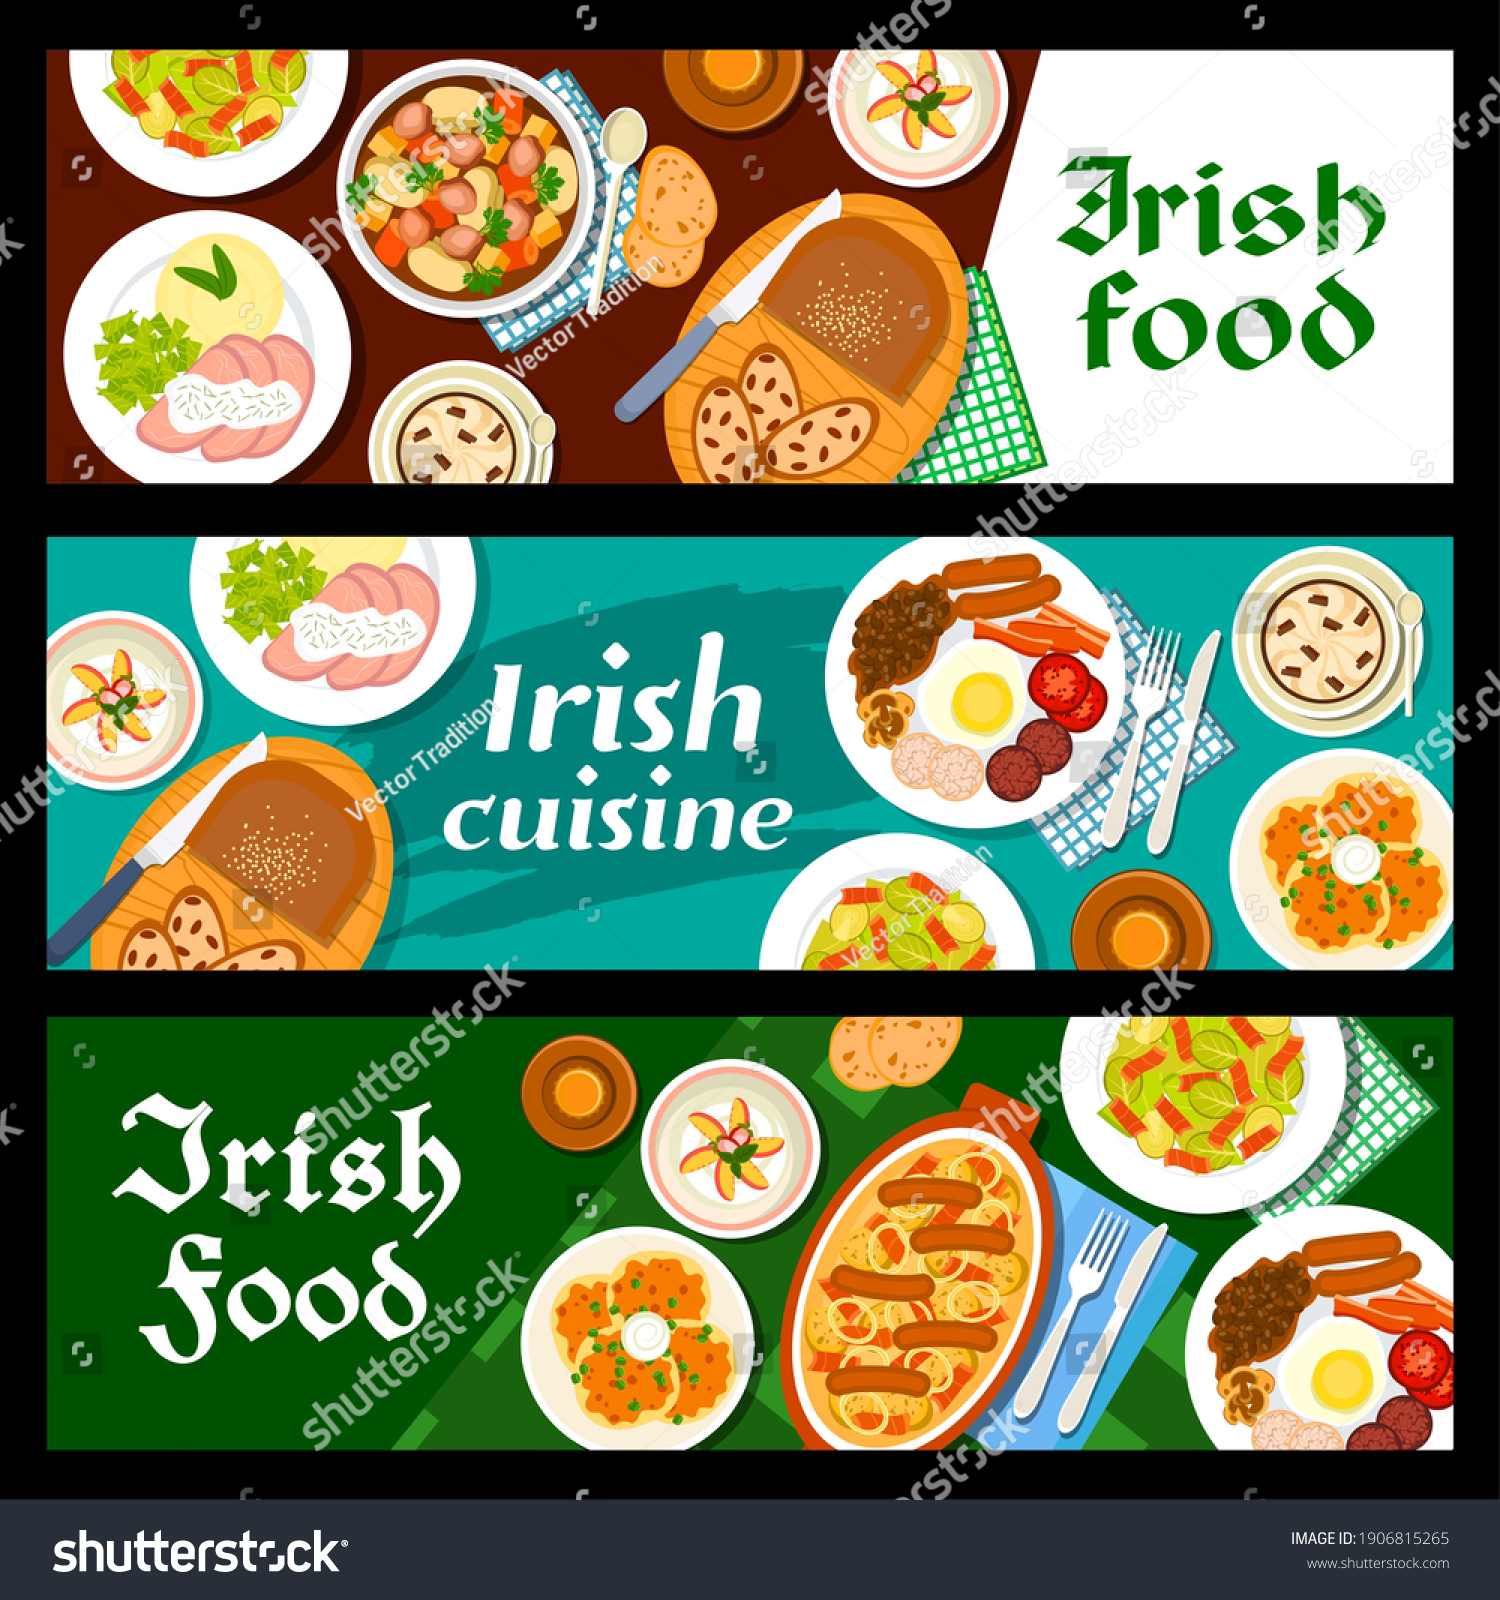 SVG of Food, Irish breakfast, Ireland cuisine vector banners, bread, pudding with raisins, salad and beef stew meals, Irish cuisine menu, restaurant traditional coffee, lunch meat and pastry desserts svg